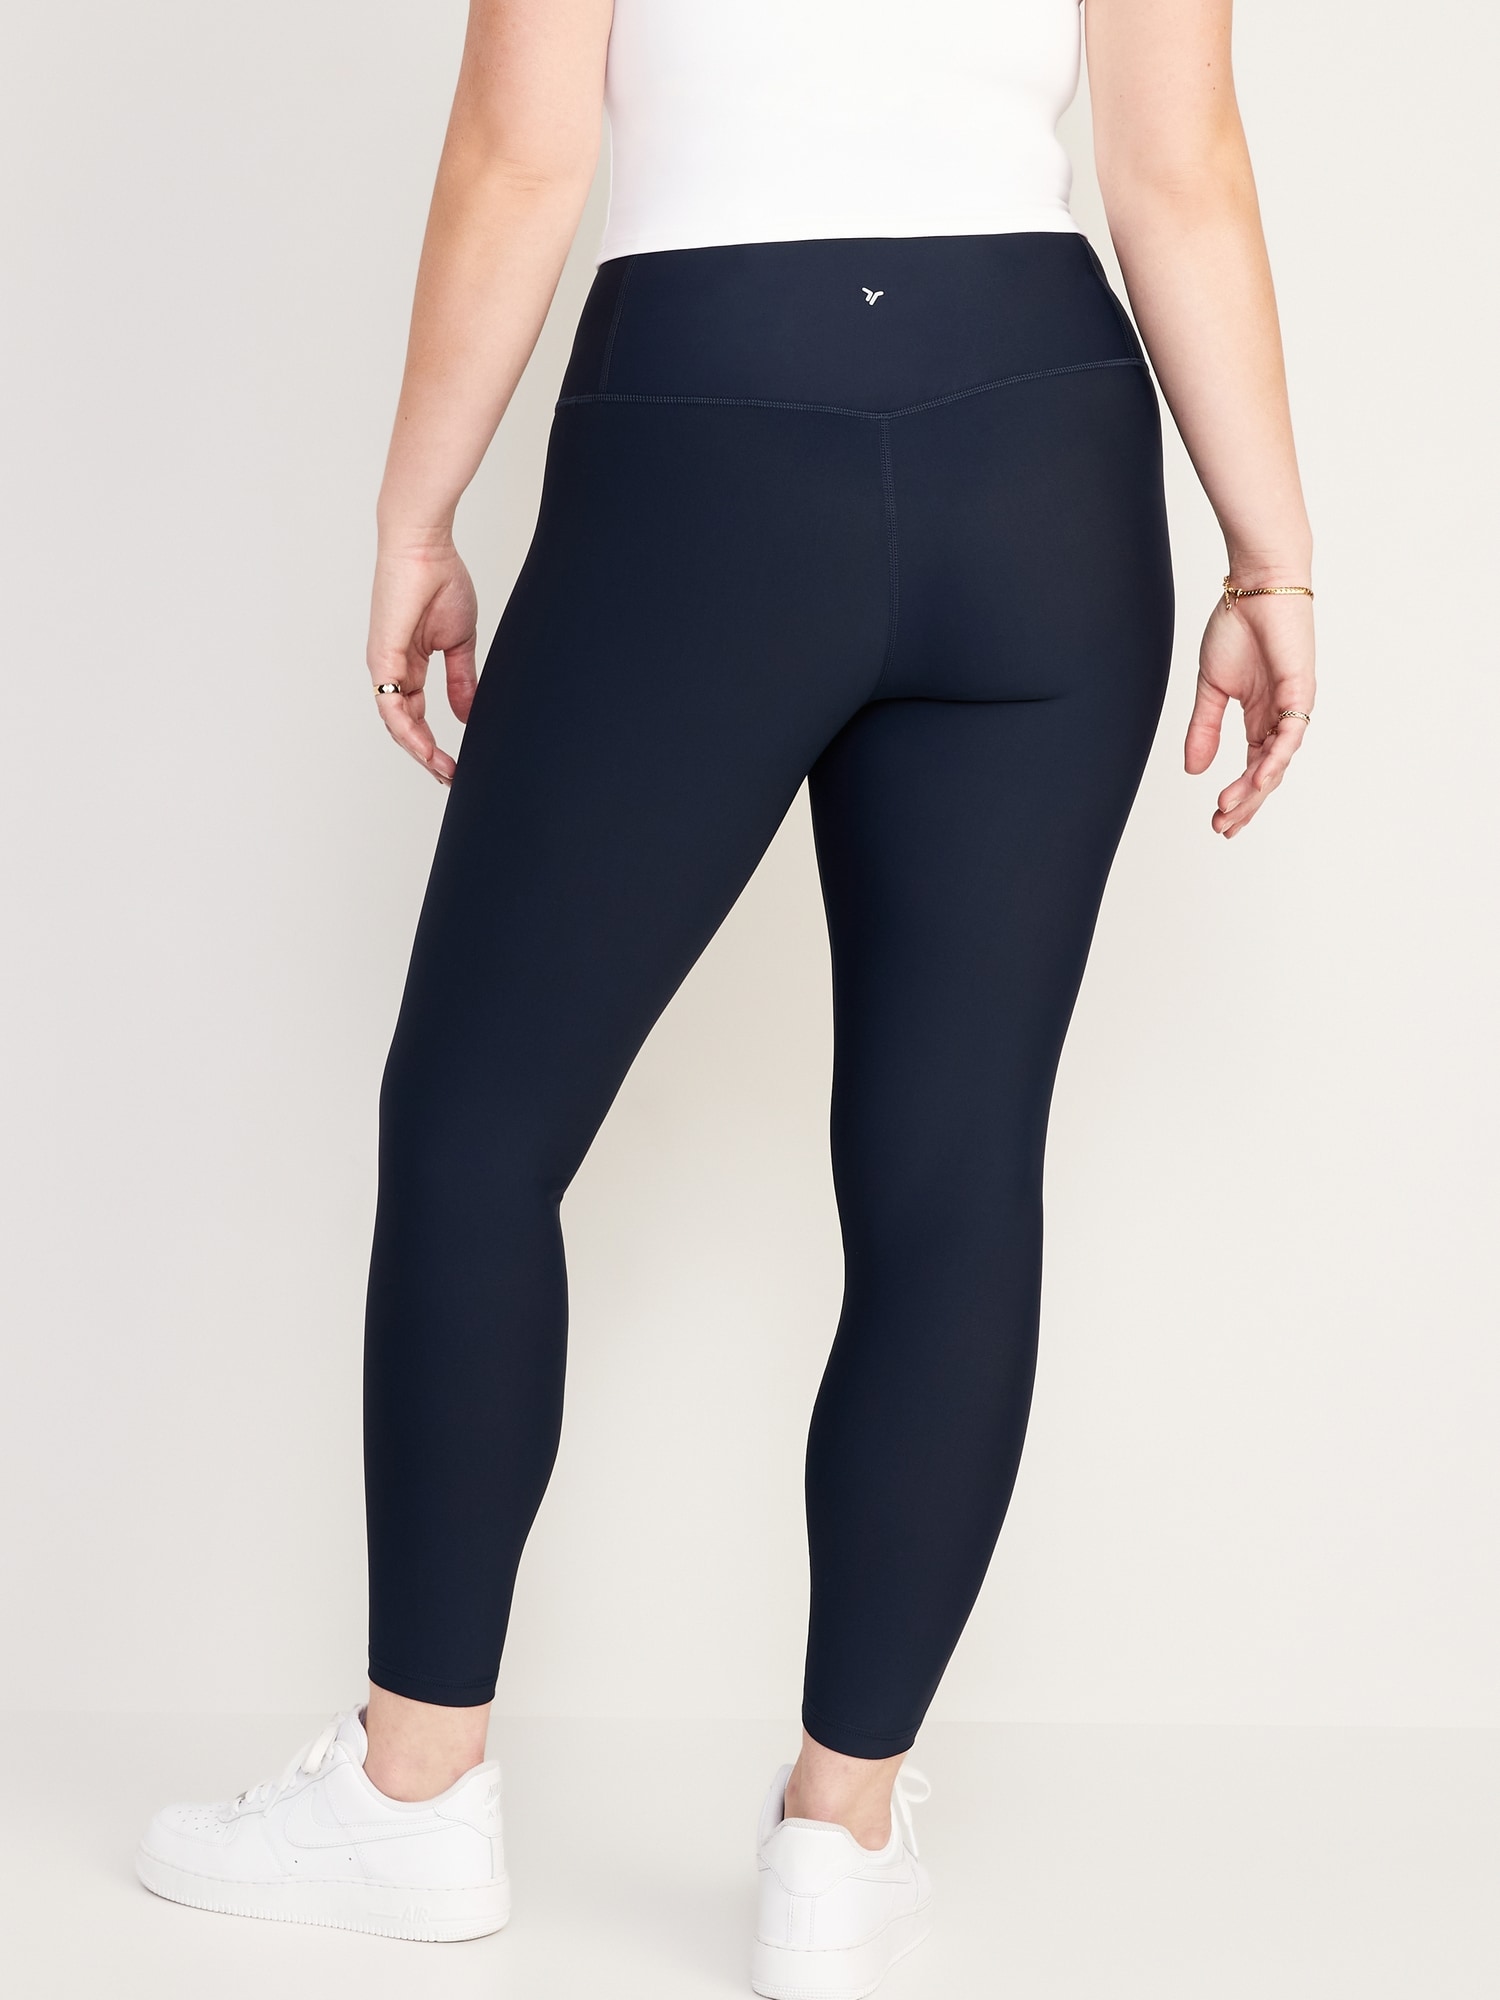 Old Navy Extra High Waisted Powersoft Hidden Pocket Leggings Size 3X - $25  New With Tags - From Selin